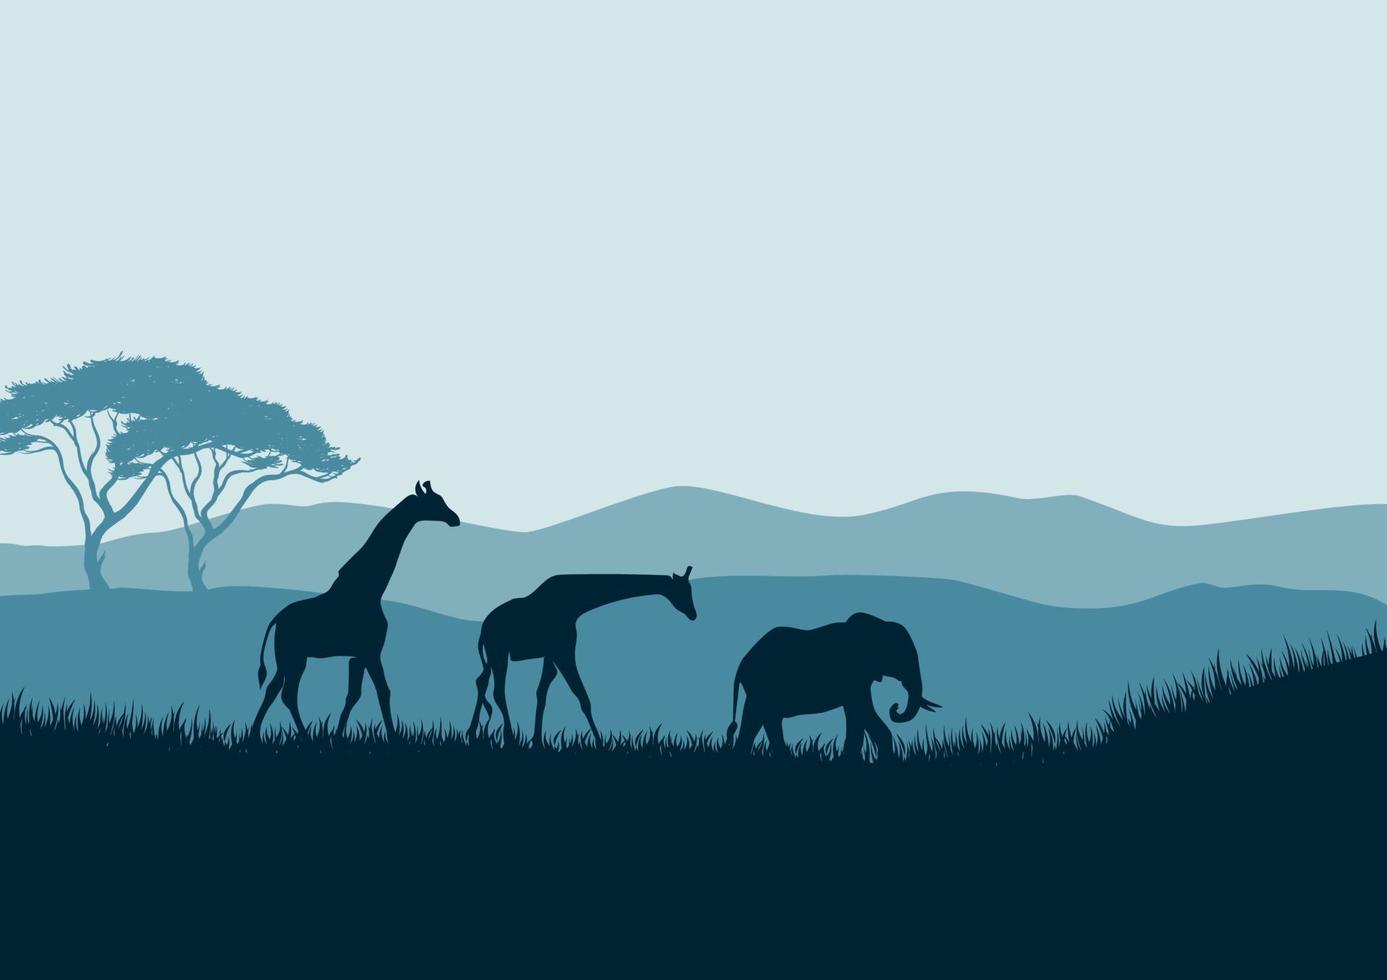 African savannah landscape with giraffe and elephant silhouettes vector background illustration